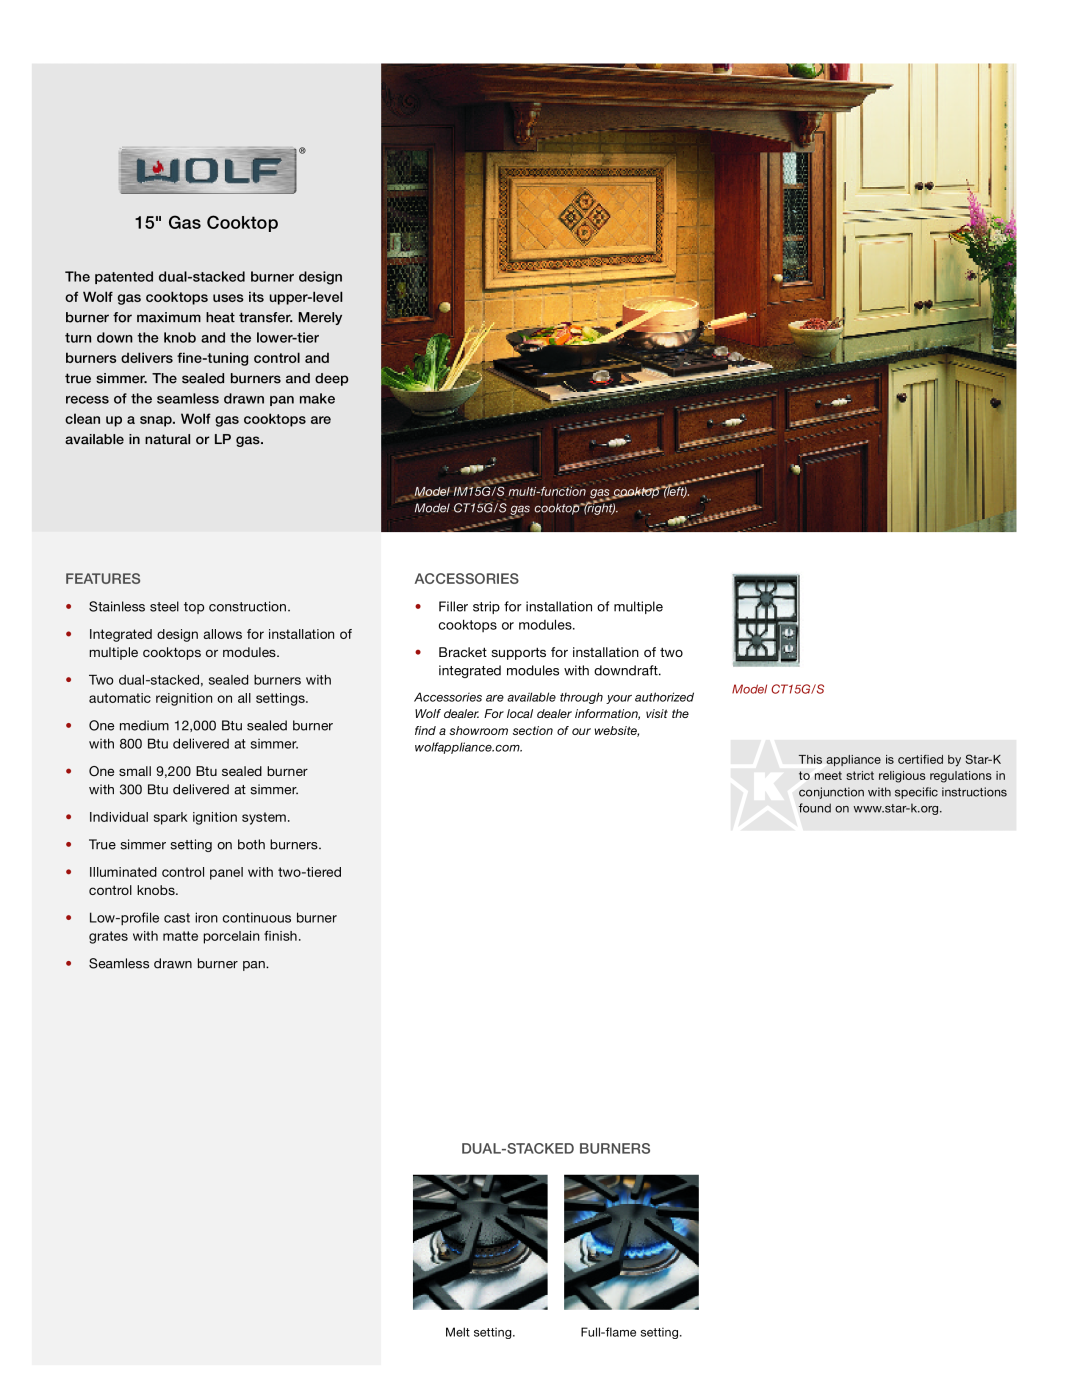 Wolf CT15G/S manual Gas Cooktop, Features, Accessories, Dual-Stacked Burners 